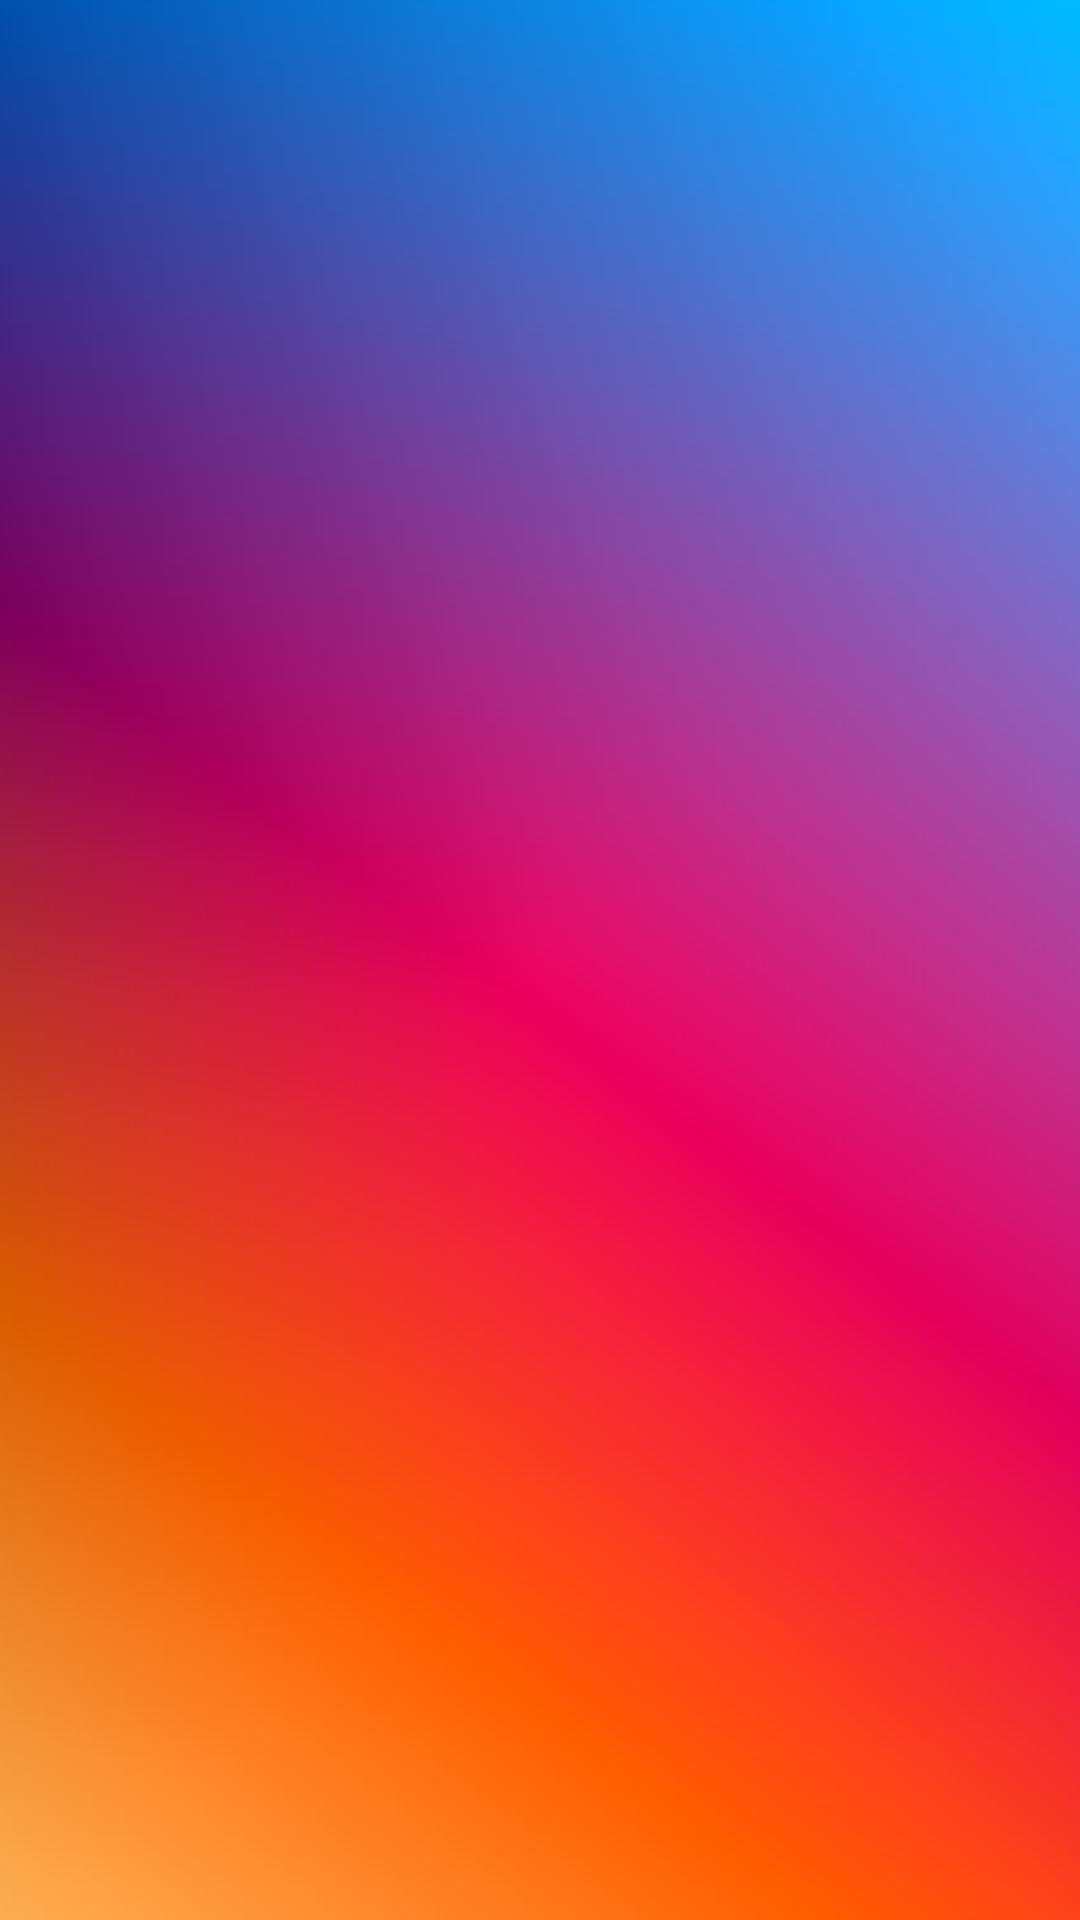 Bright Colors IPhone Wallpaper - IPhone Wallpapers : iPhone Wallpapers